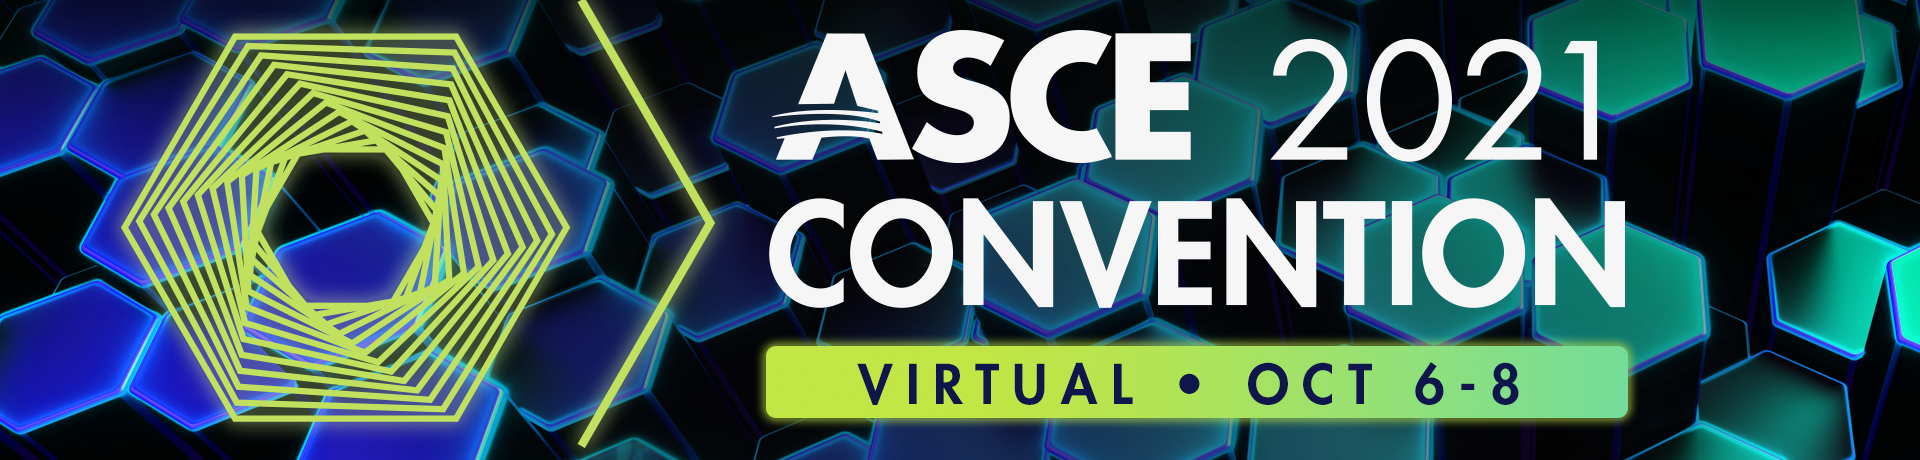 The banner to welcome you to ASCE Convention 2021